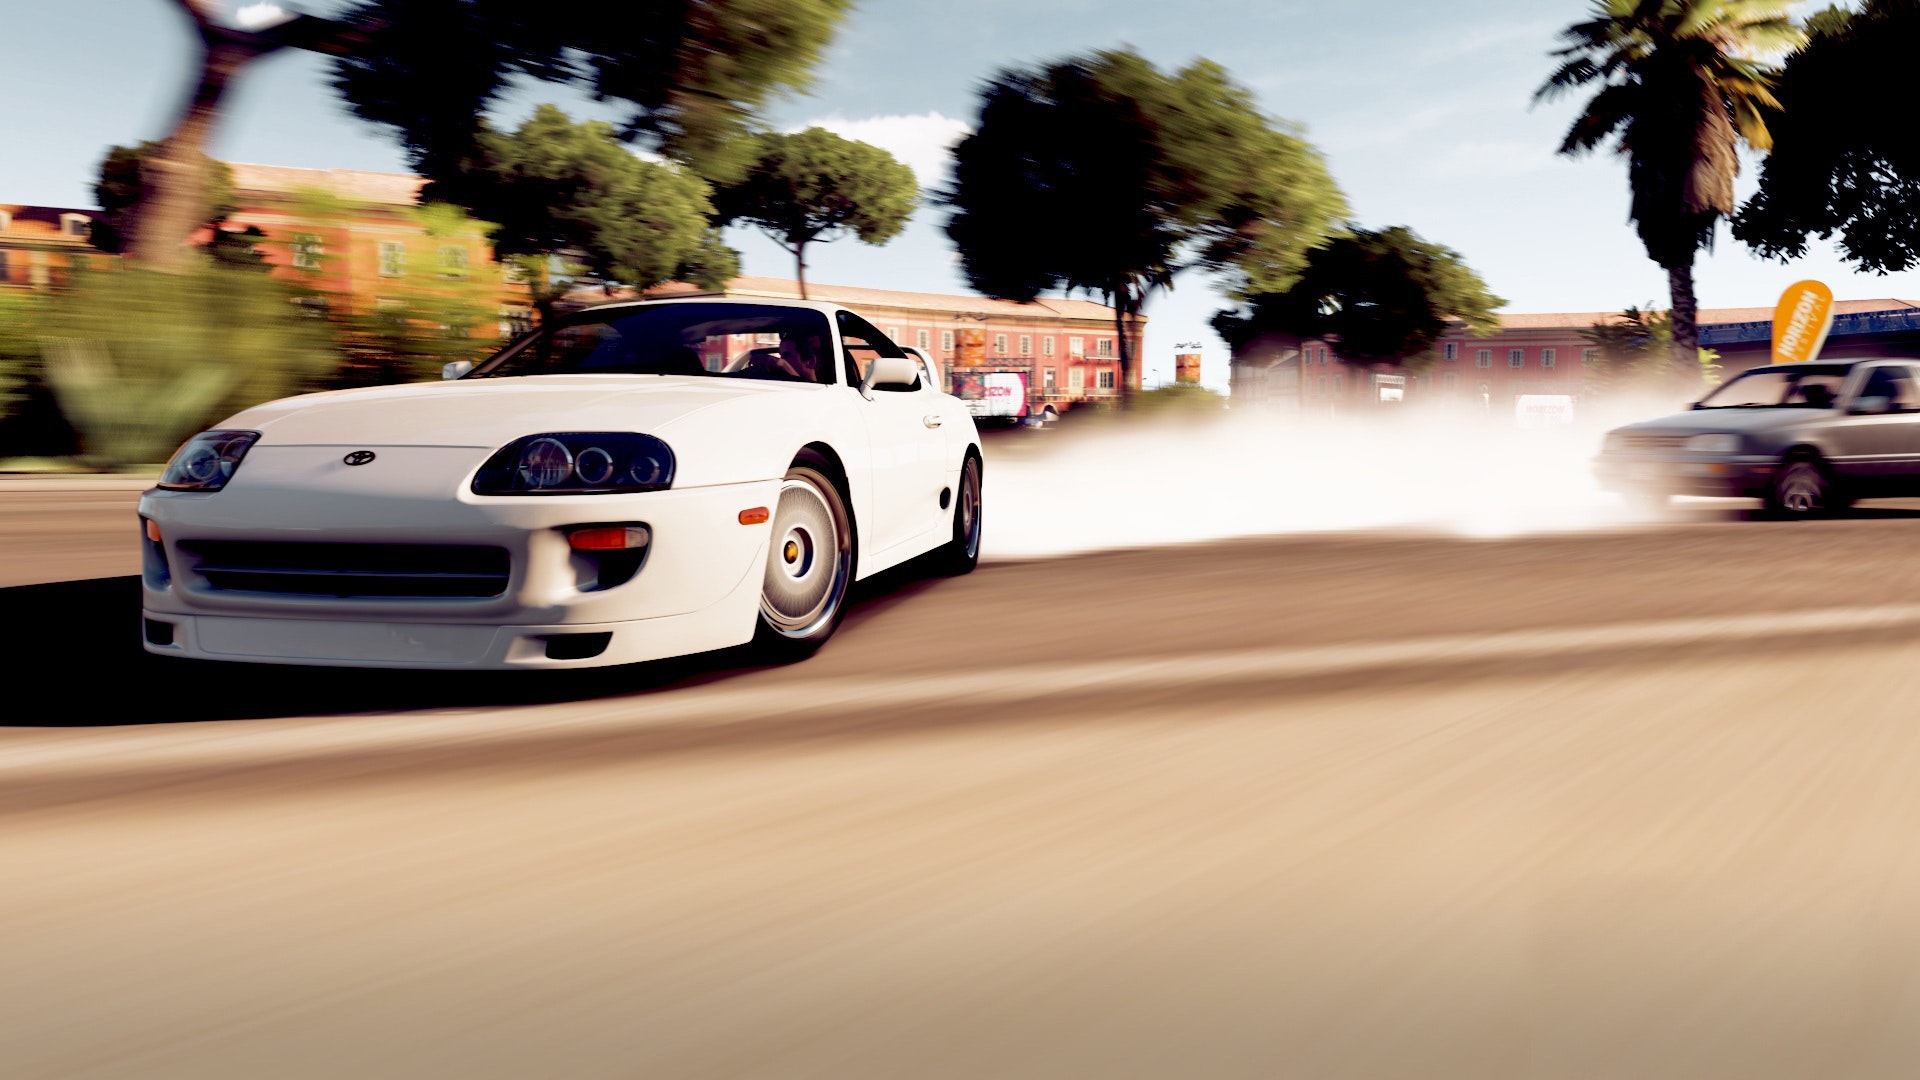 A white sports car drifting recklessly on a dusty road in New Jersey, leaving a trail of dust behind, with blurred trees and buildings in the background under a clear sky.